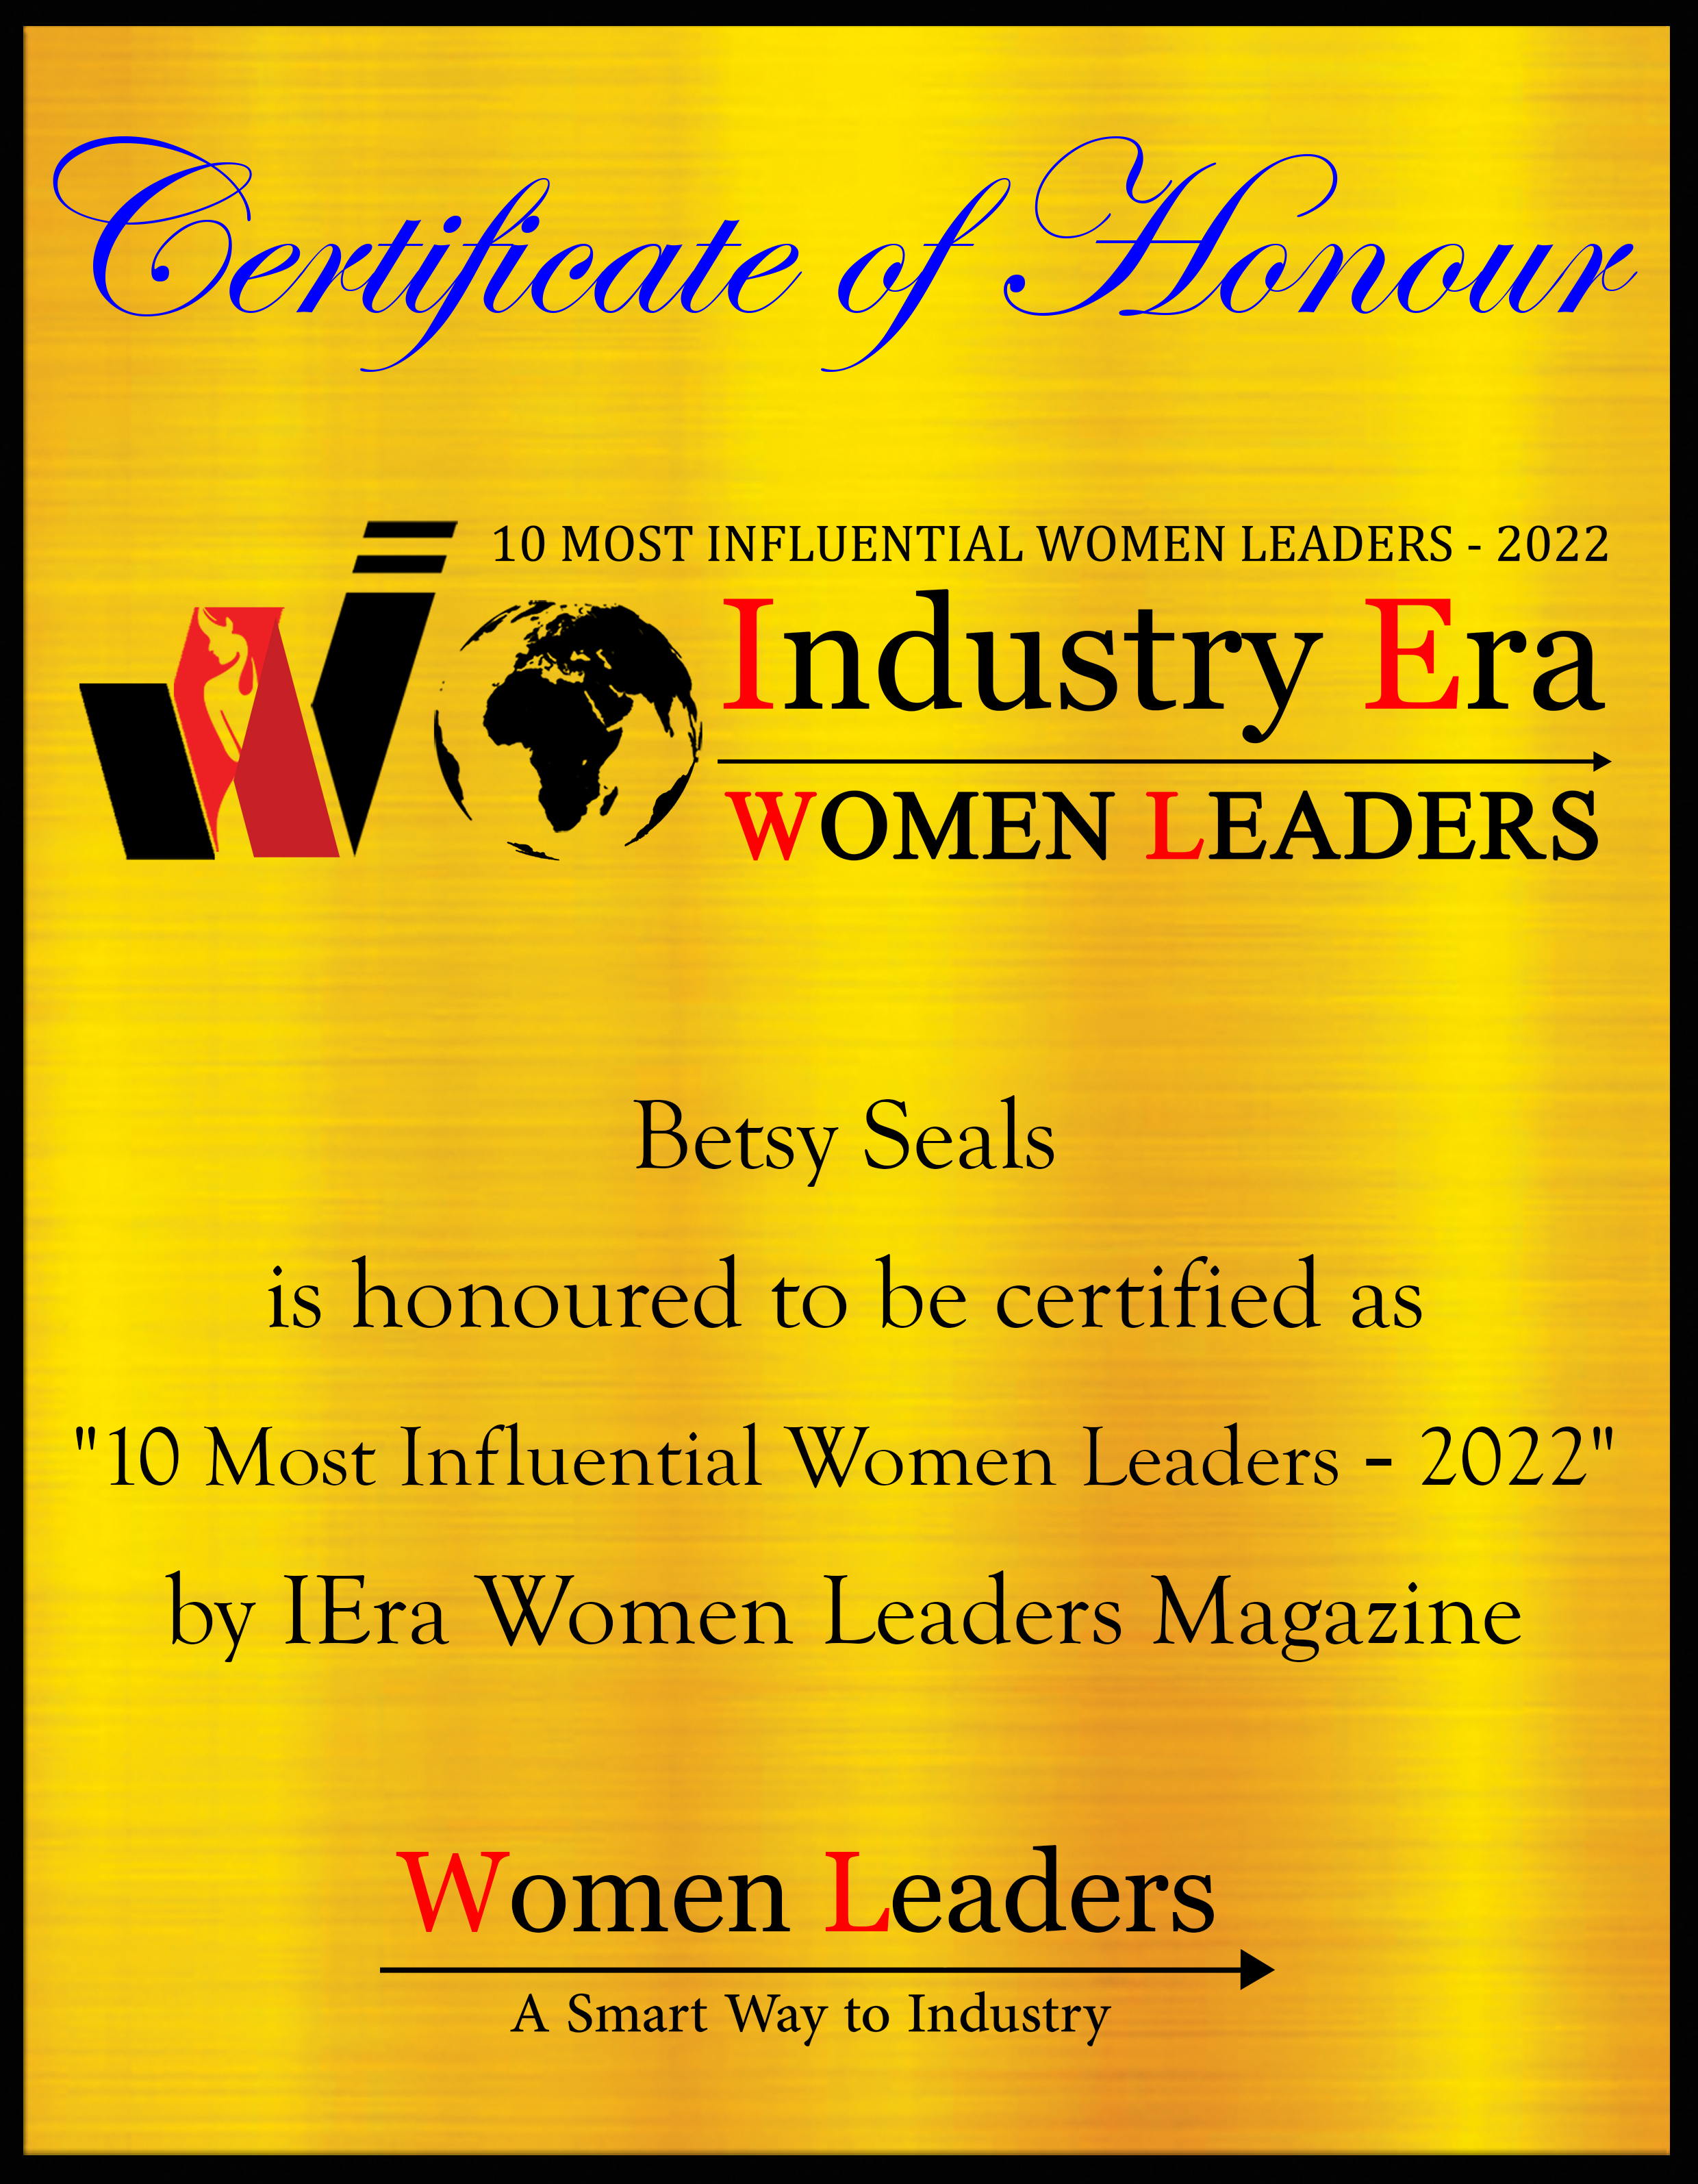 Betsy Seals, Co-Founder & CEO of Rebellis Group, 10 Most Influential Women Leaders of 2022